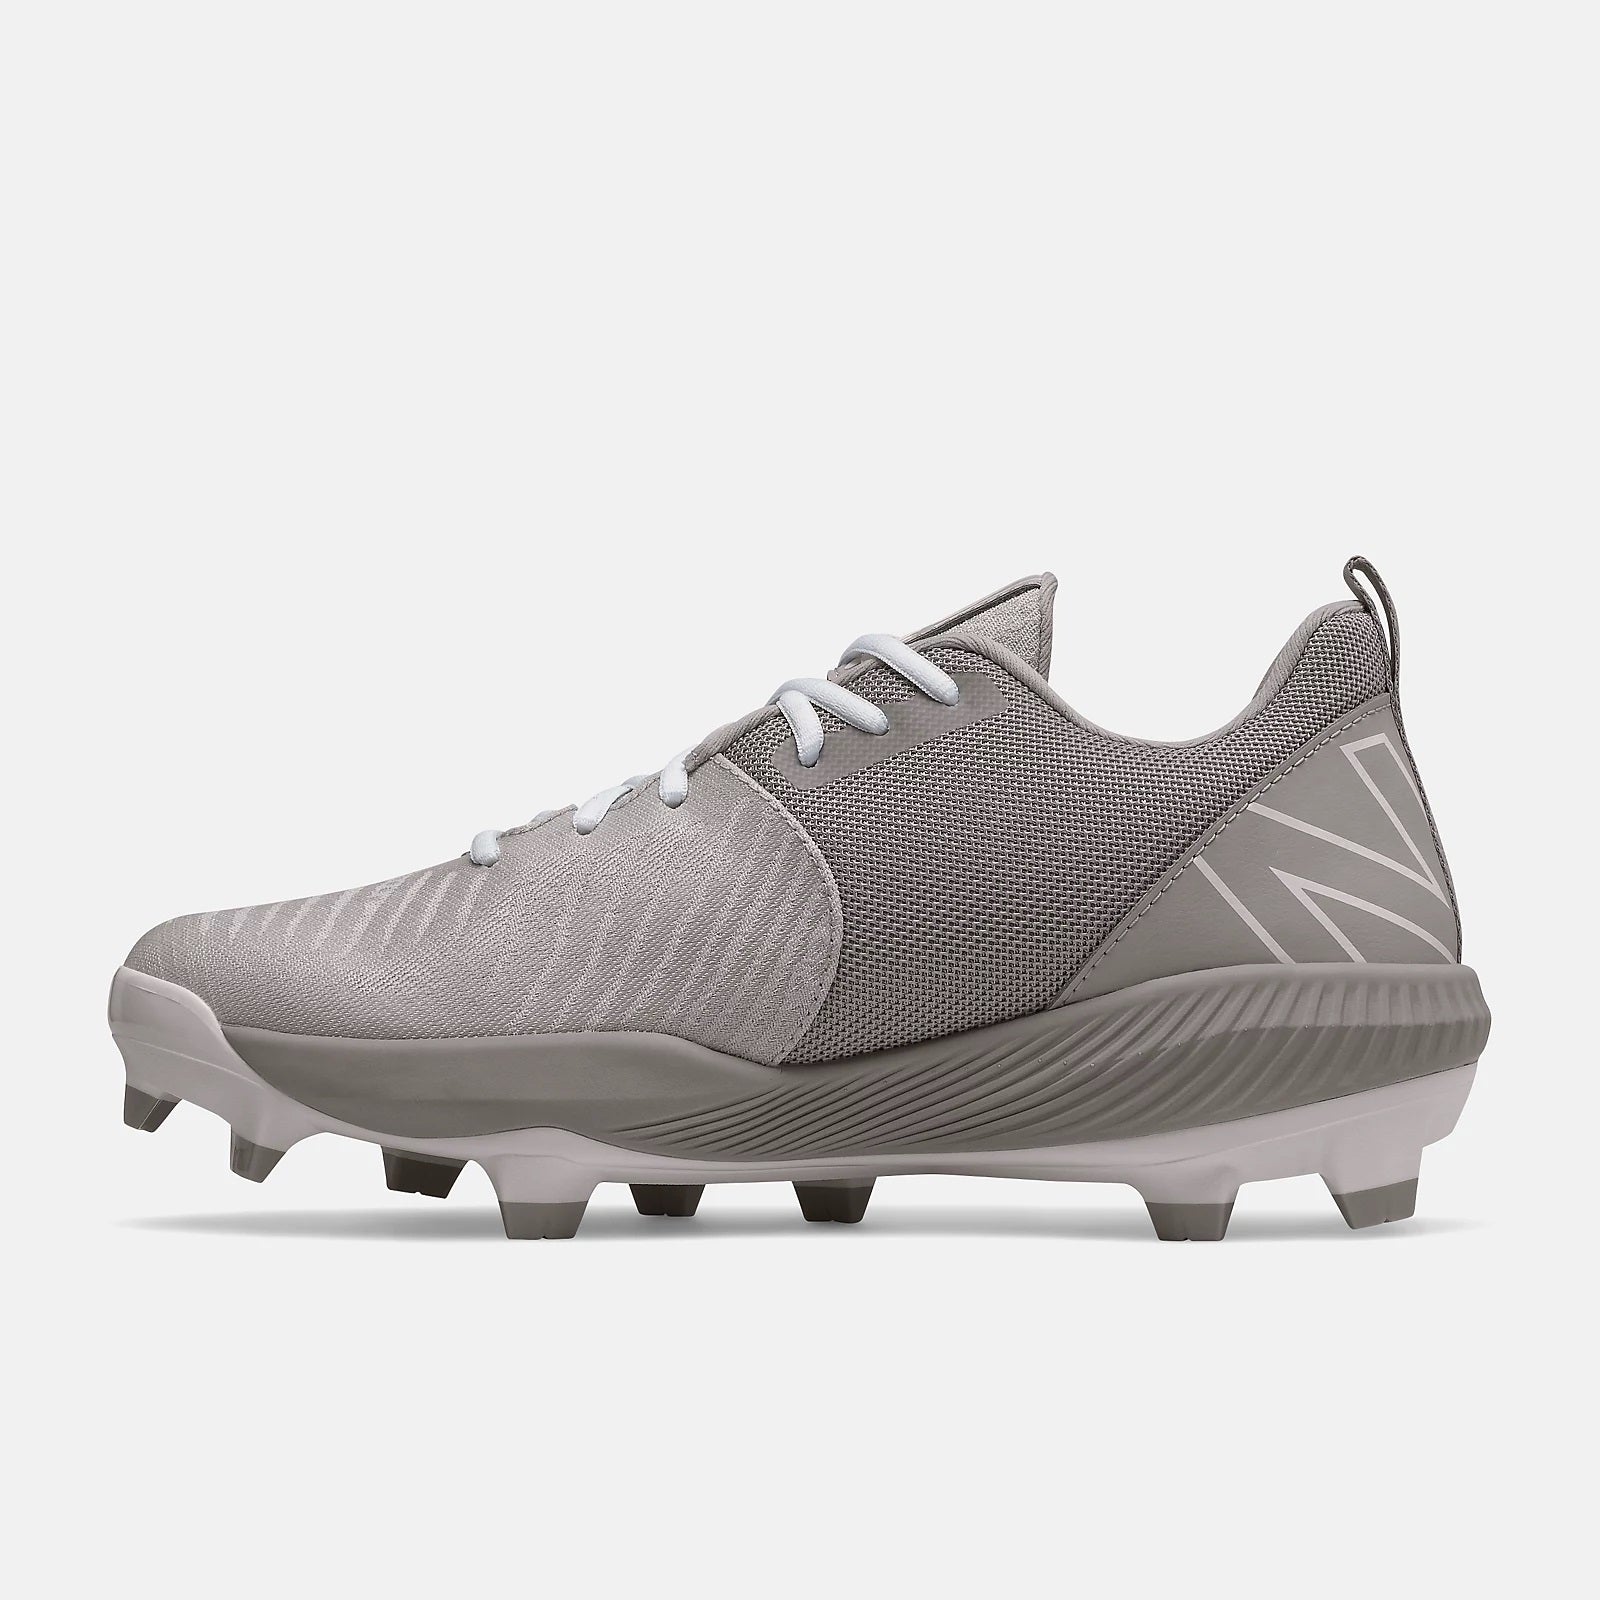 New Balance - Grey FuelCell 4040v6 Molded Cleats (PL4040G6)